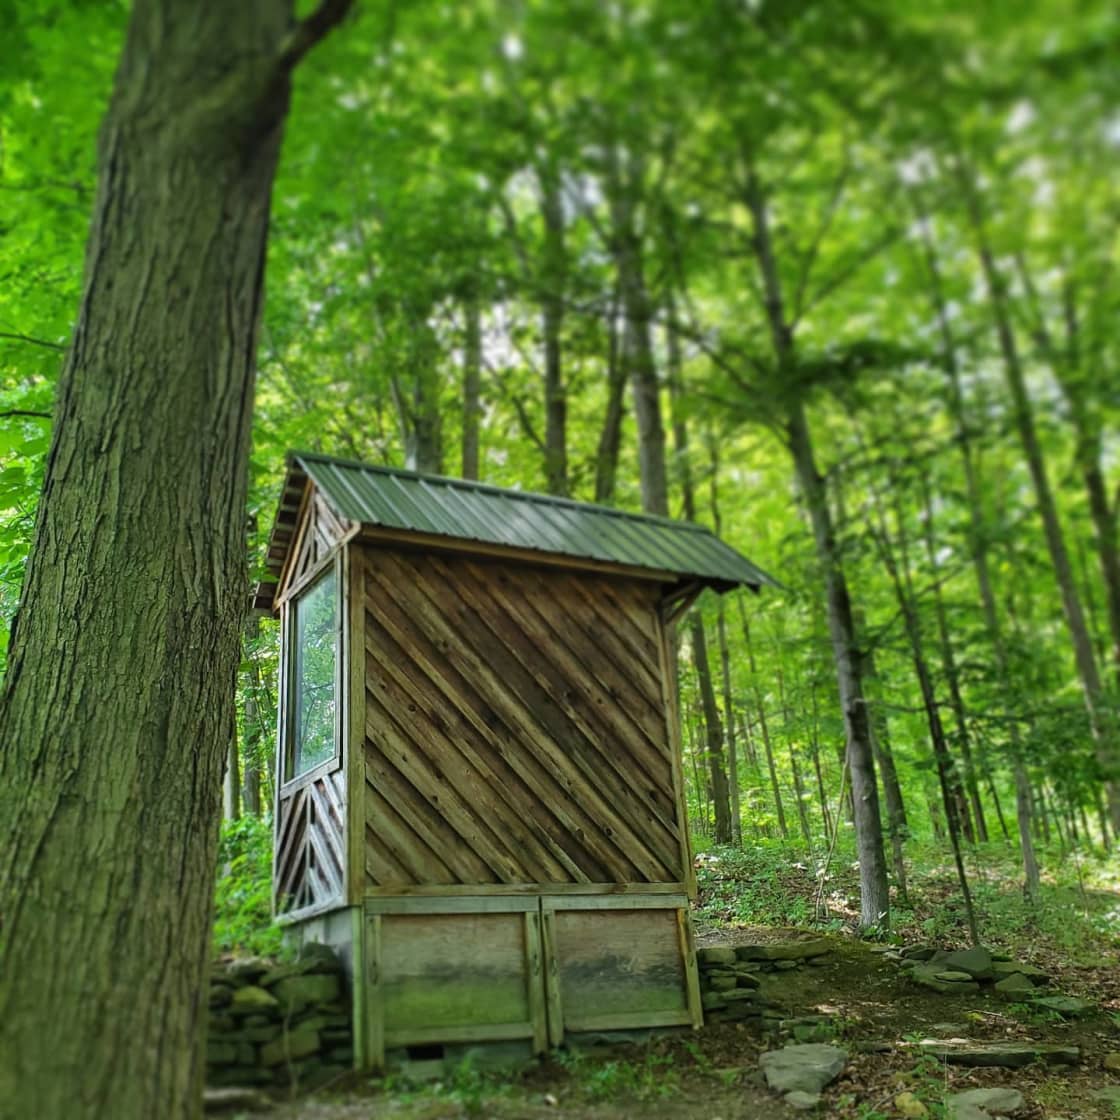 The outhouse near the Pines 